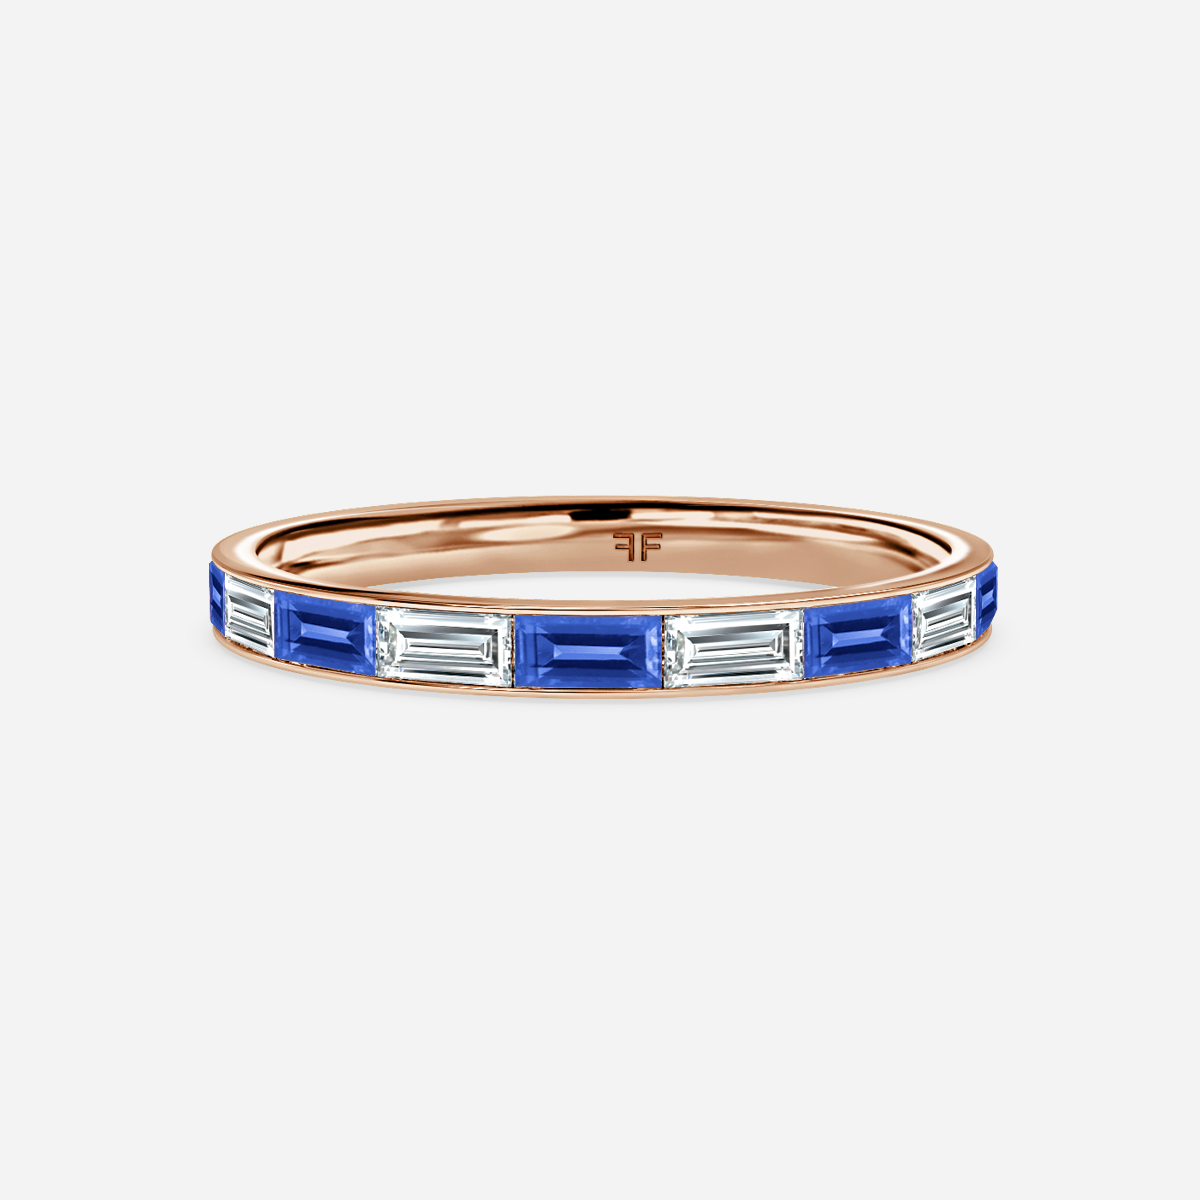 Baguette Cut Sapphire And Diamond Wedding Ring In Rose Gold